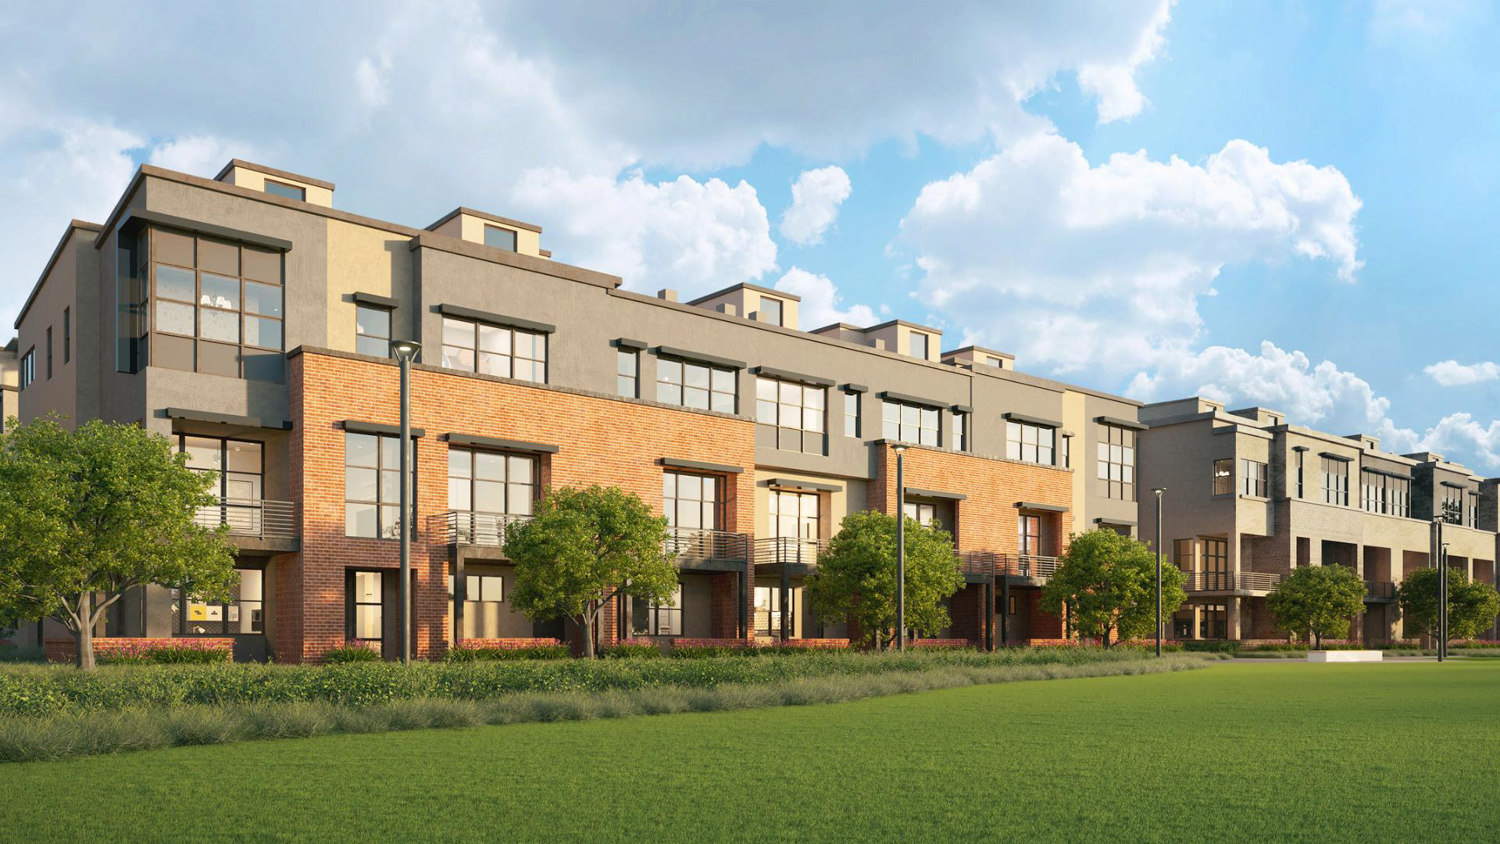 Aster Avenue townhomes, rendering courtesy of the Toll Brothers